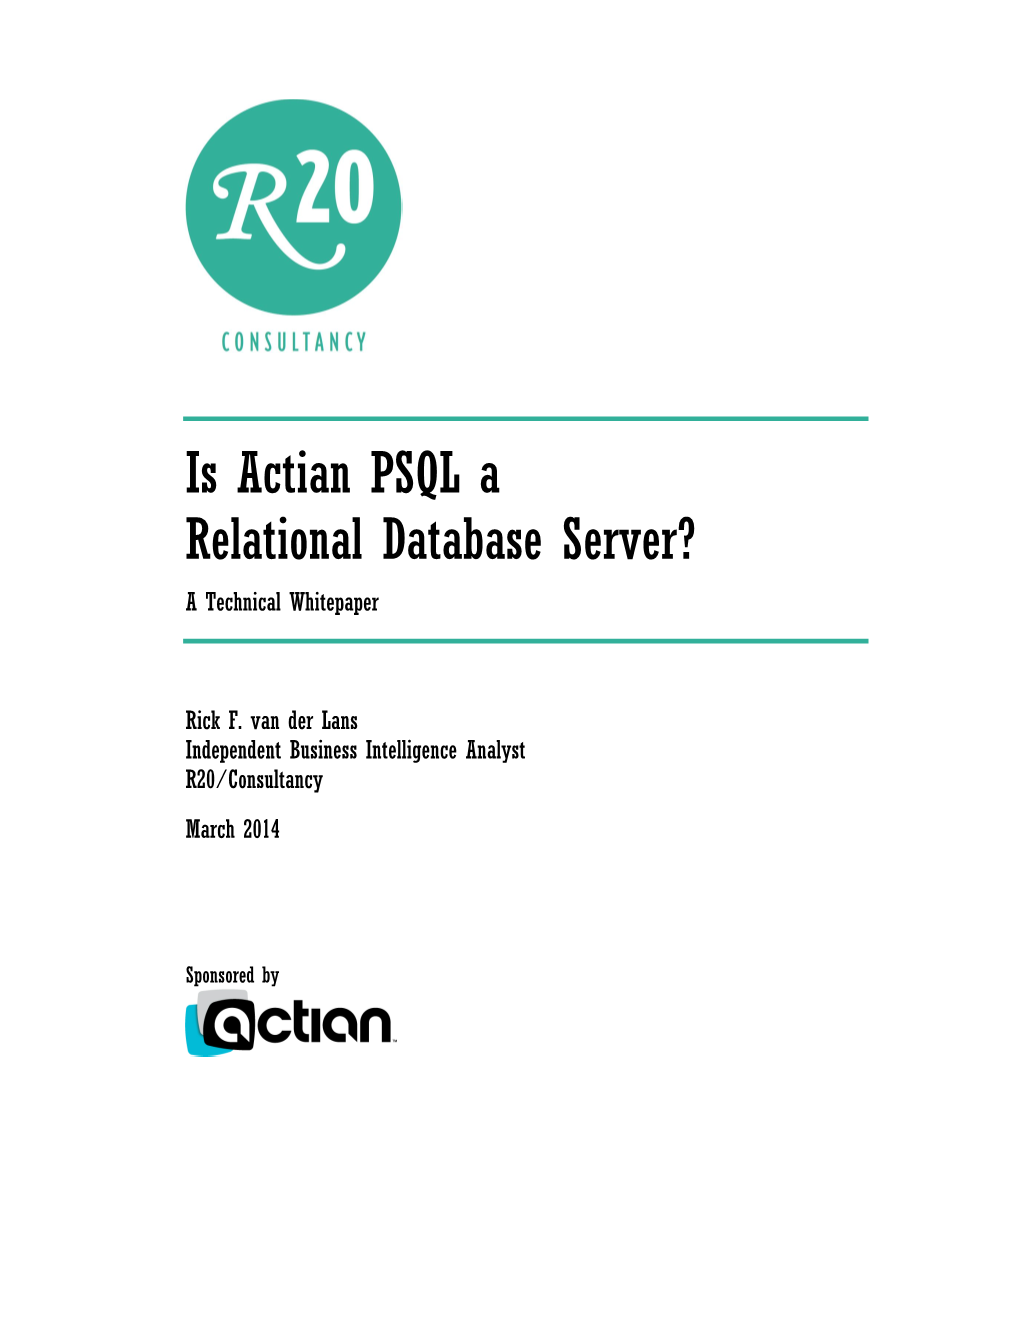 Is Actian PSQL a Relational Database Server?